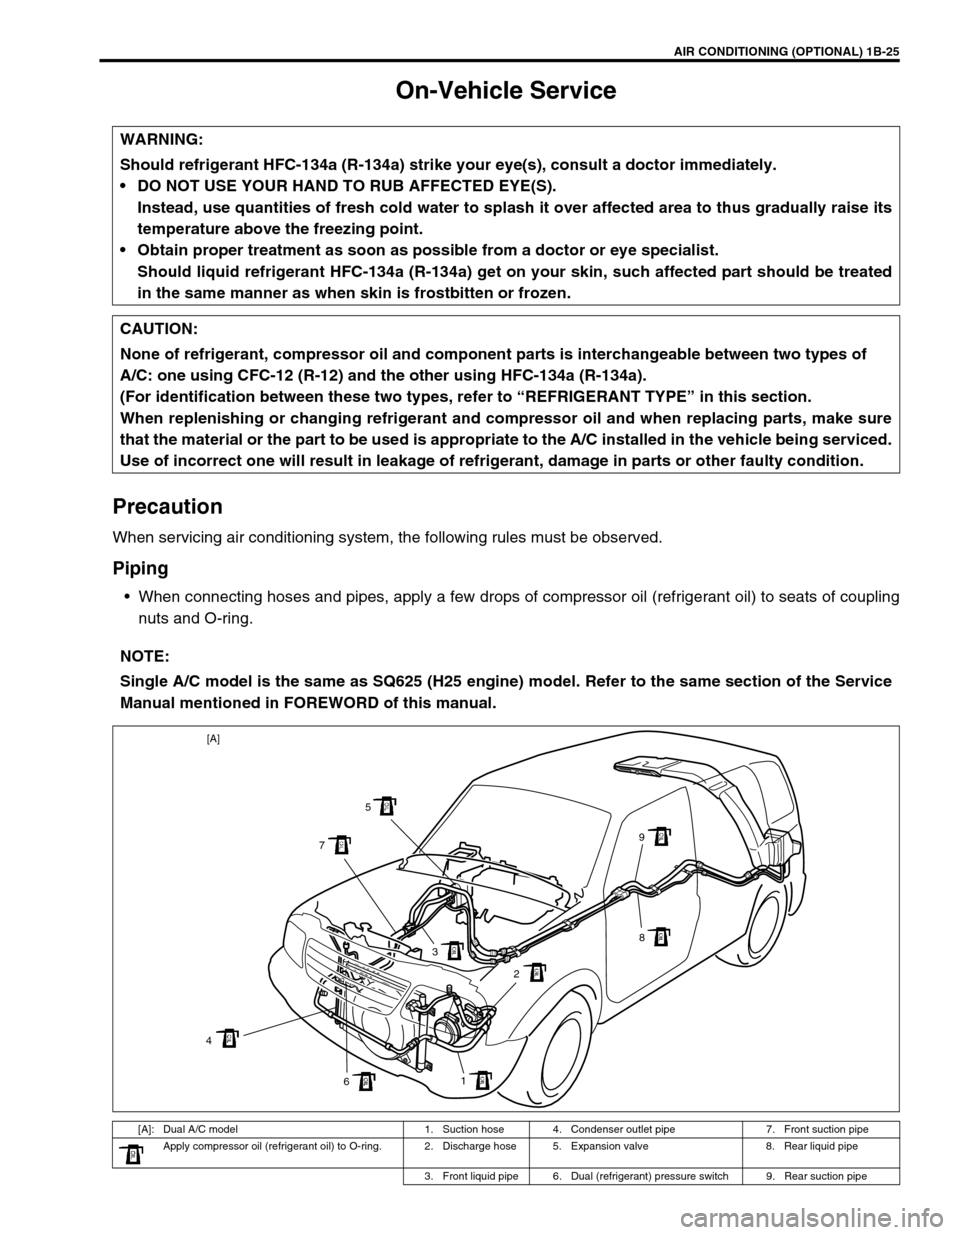 SUZUKI GRAND VITARA 1999 2.G Owners Manual AIR CONDITIONING (OPTIONAL) 1B-25
On-Vehicle Service
Precaution
When servicing air conditioning system, the following rules must be observed.
Piping
When connecting hoses and pipes, apply a few drops